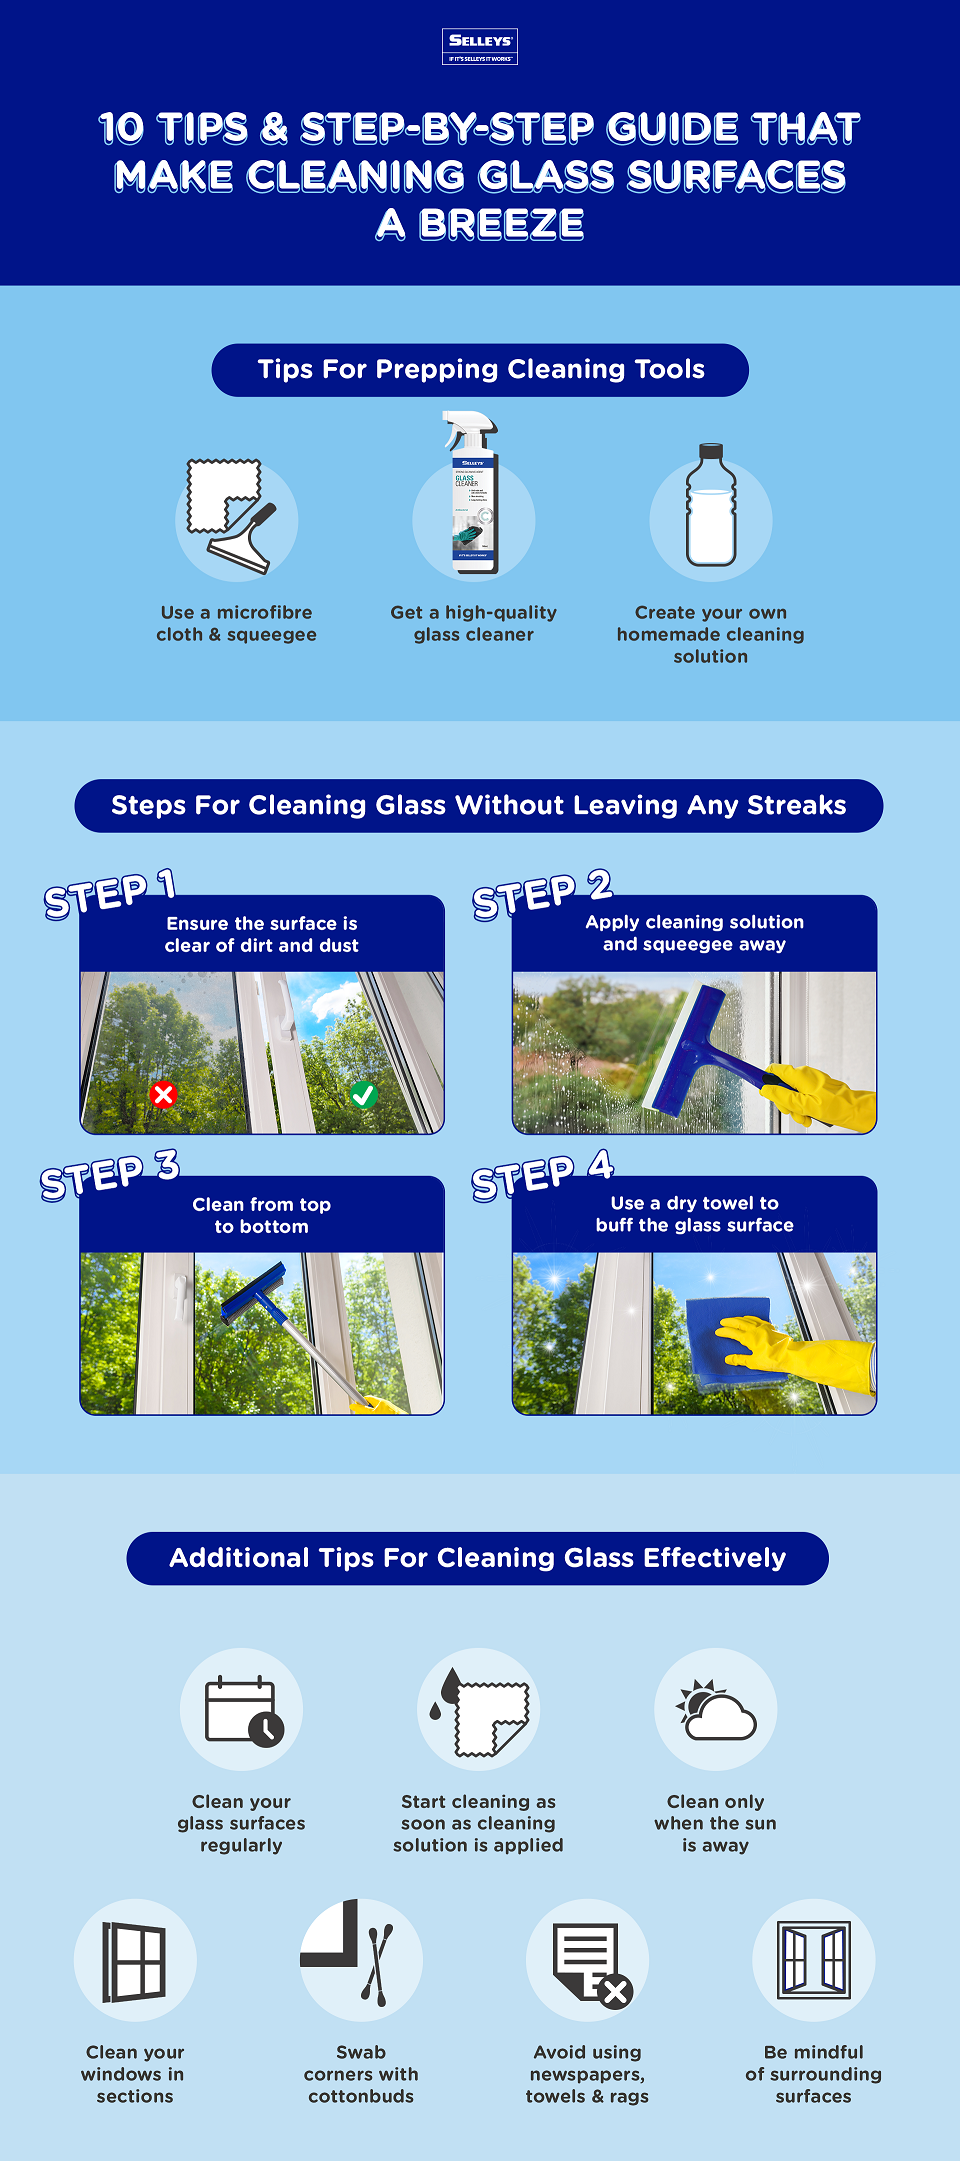 5 easy tips for cleaning really dirty glass